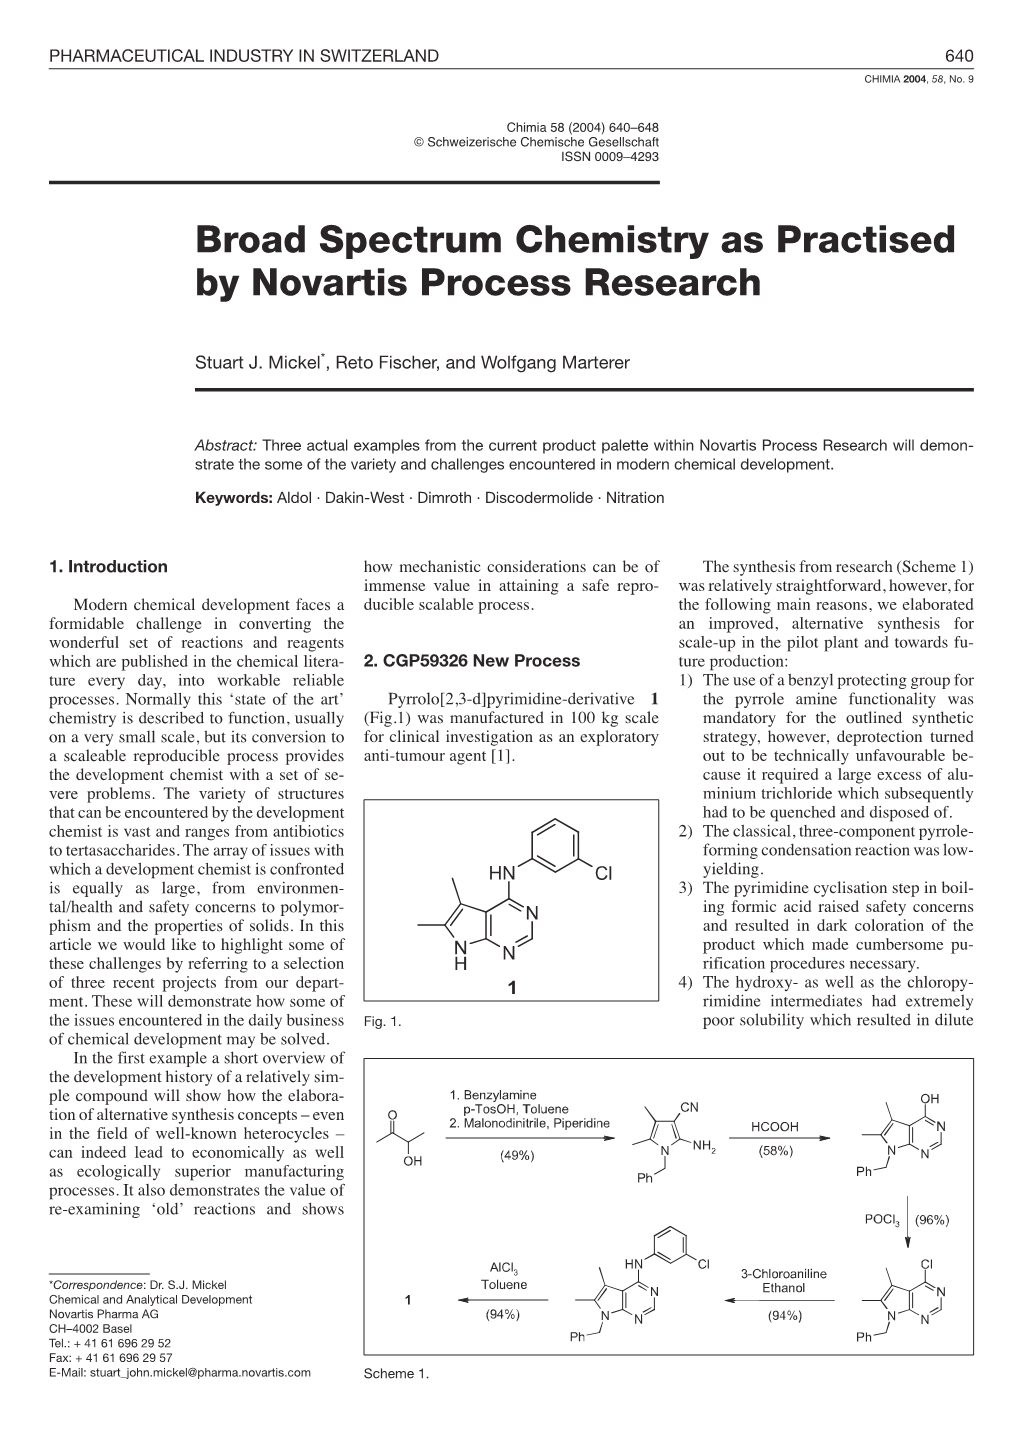 Broad Spectrum Chemistry As Practised by Novartis Process Research